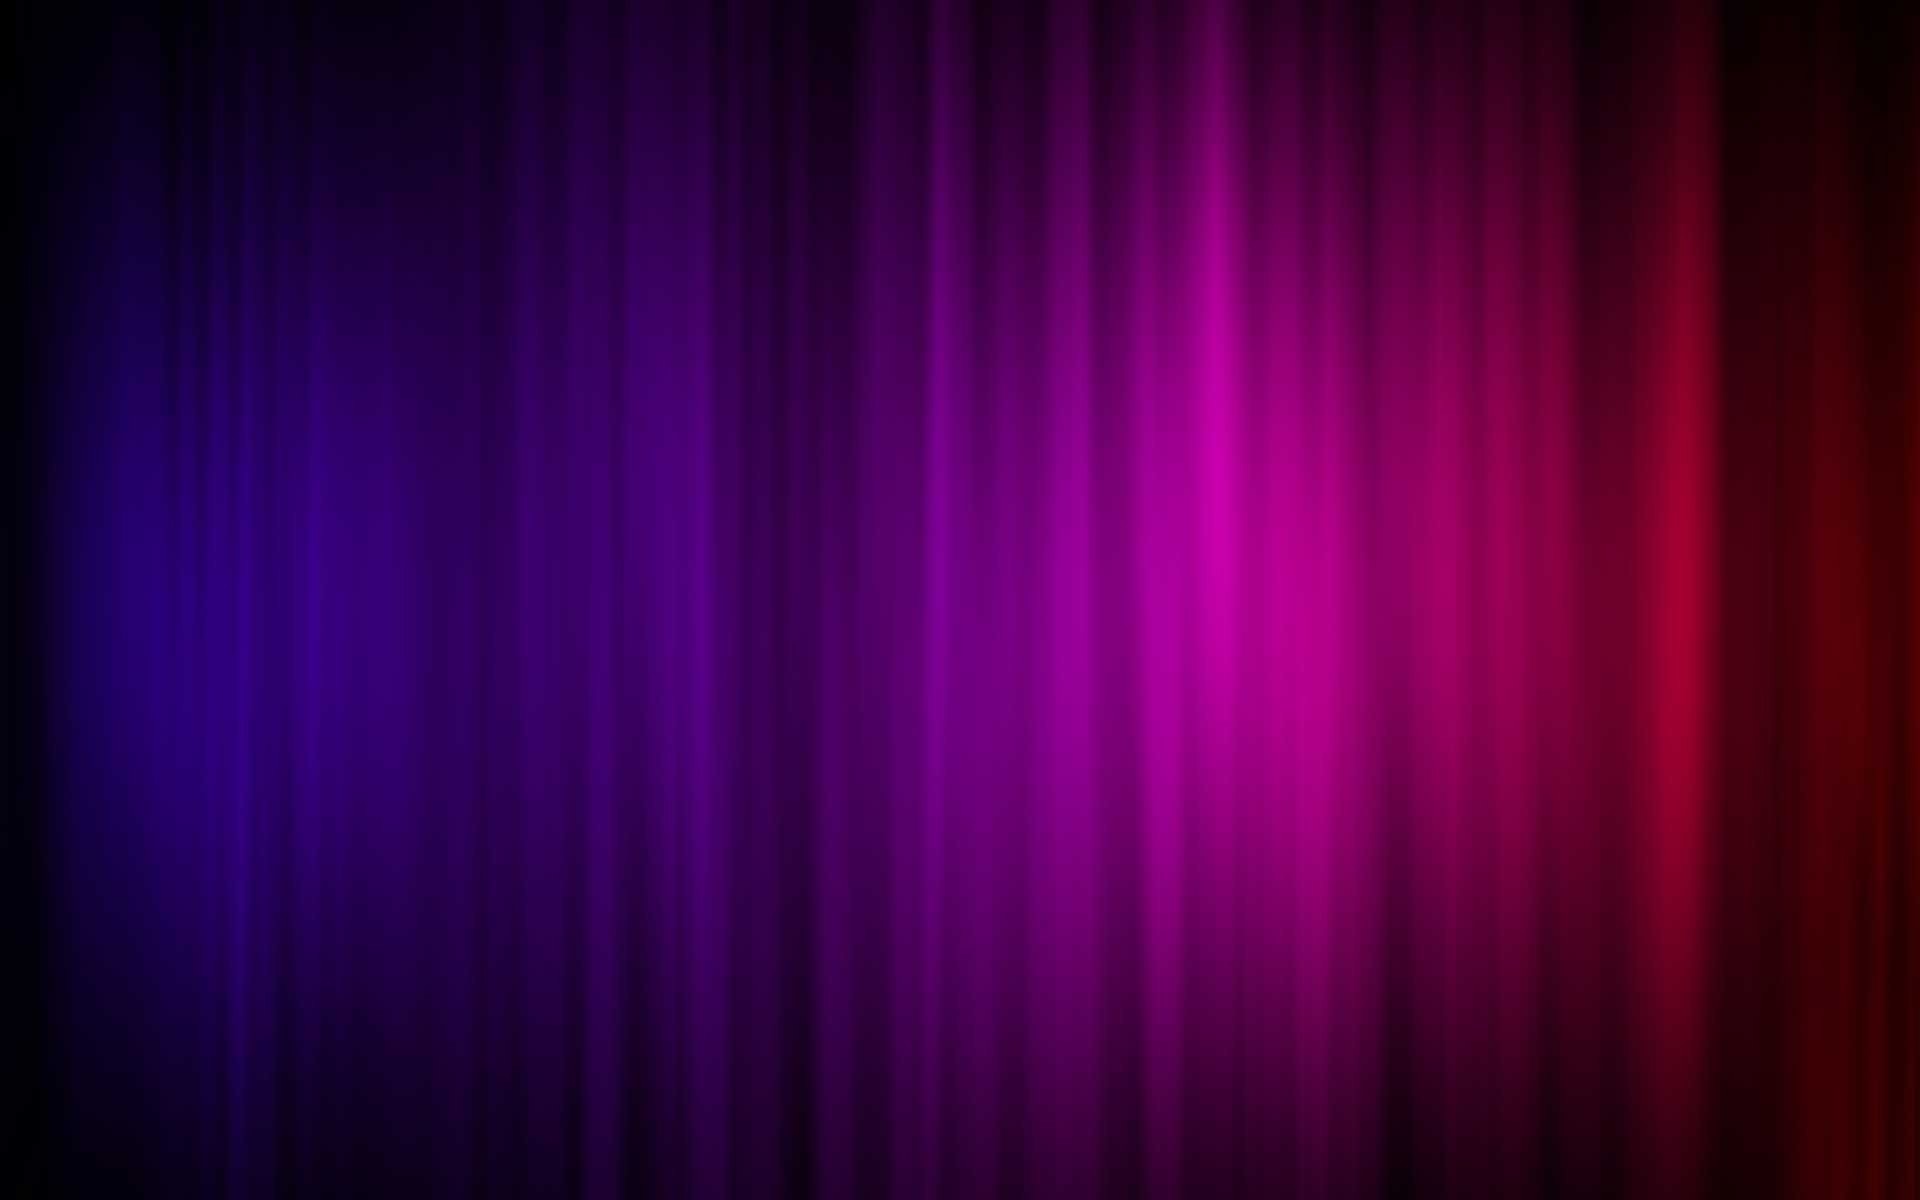 1920x1200 Title : purple and blue backgrounds – walldevil. Dimension : 1920 x 1200.  File Type : JPG/JPEG